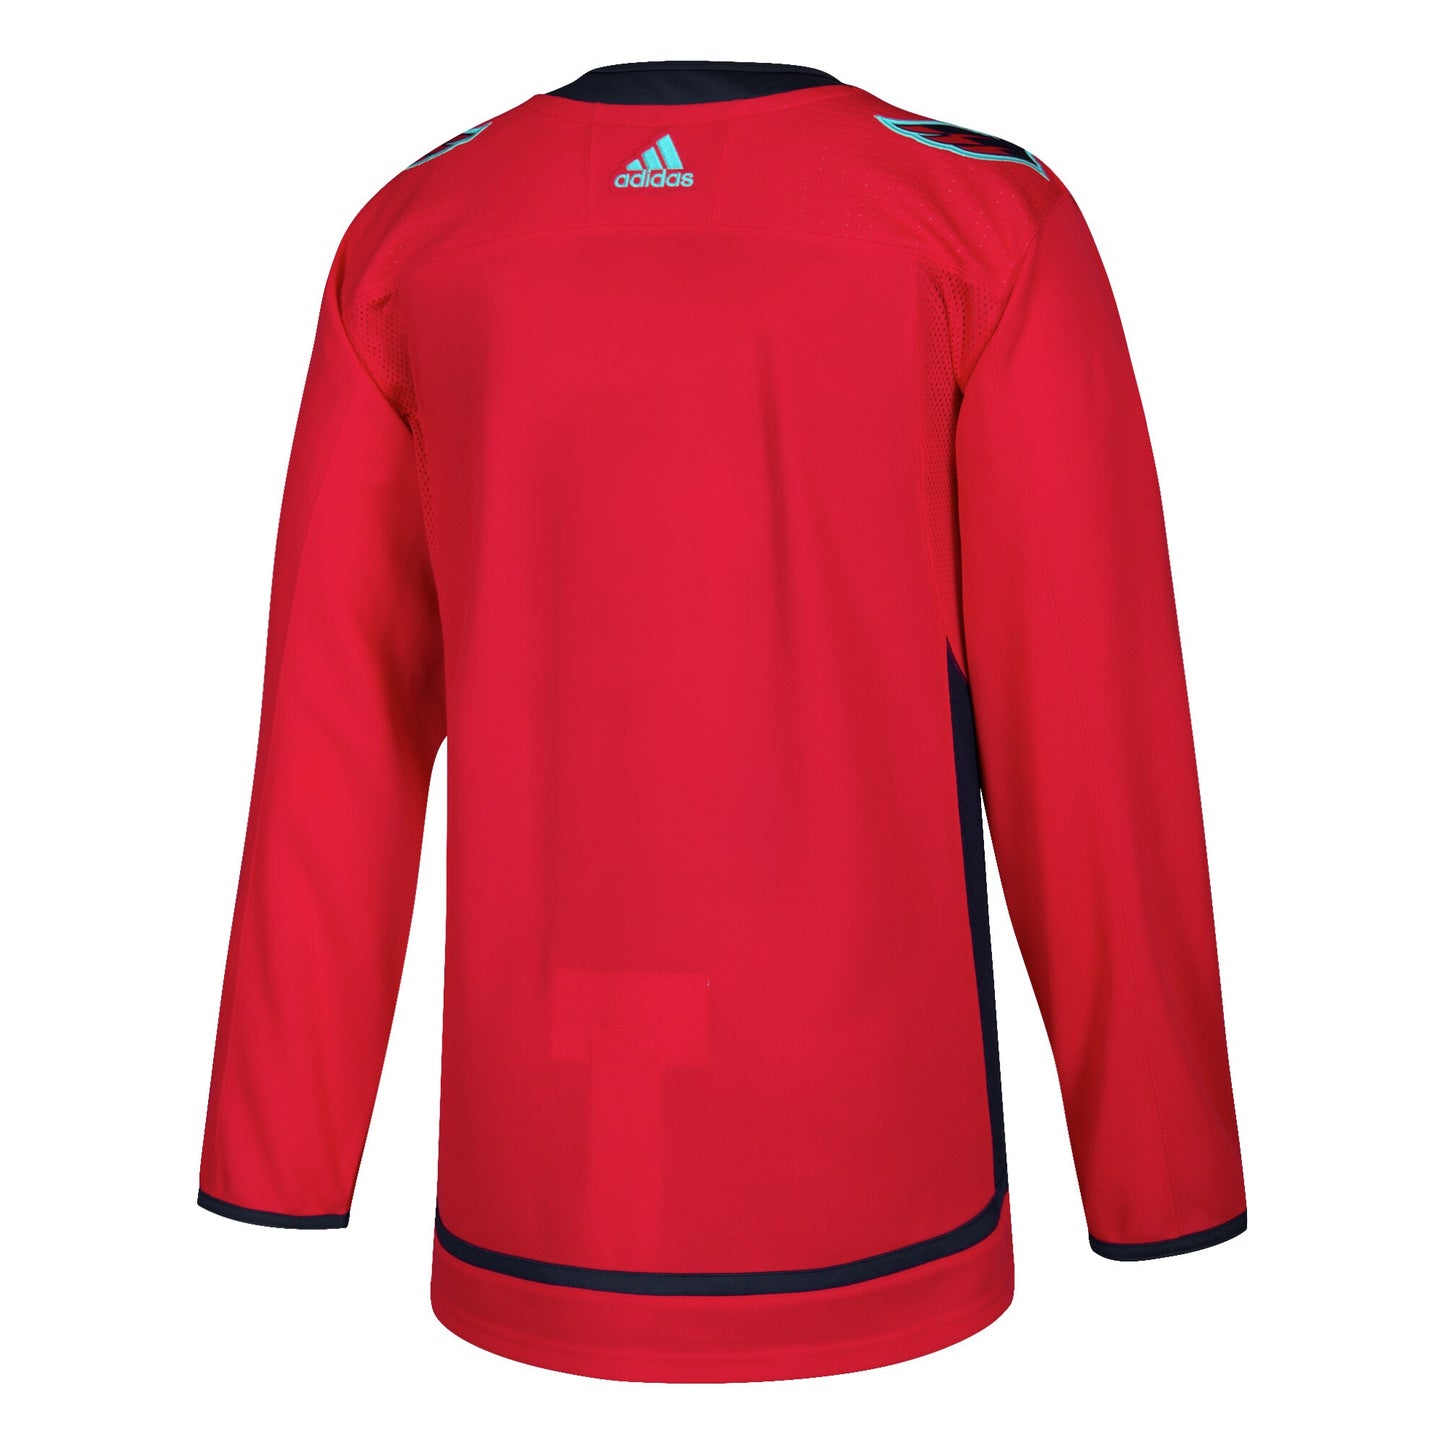 Washington Capitals adidas Home Authentic Blank Jersey - Red